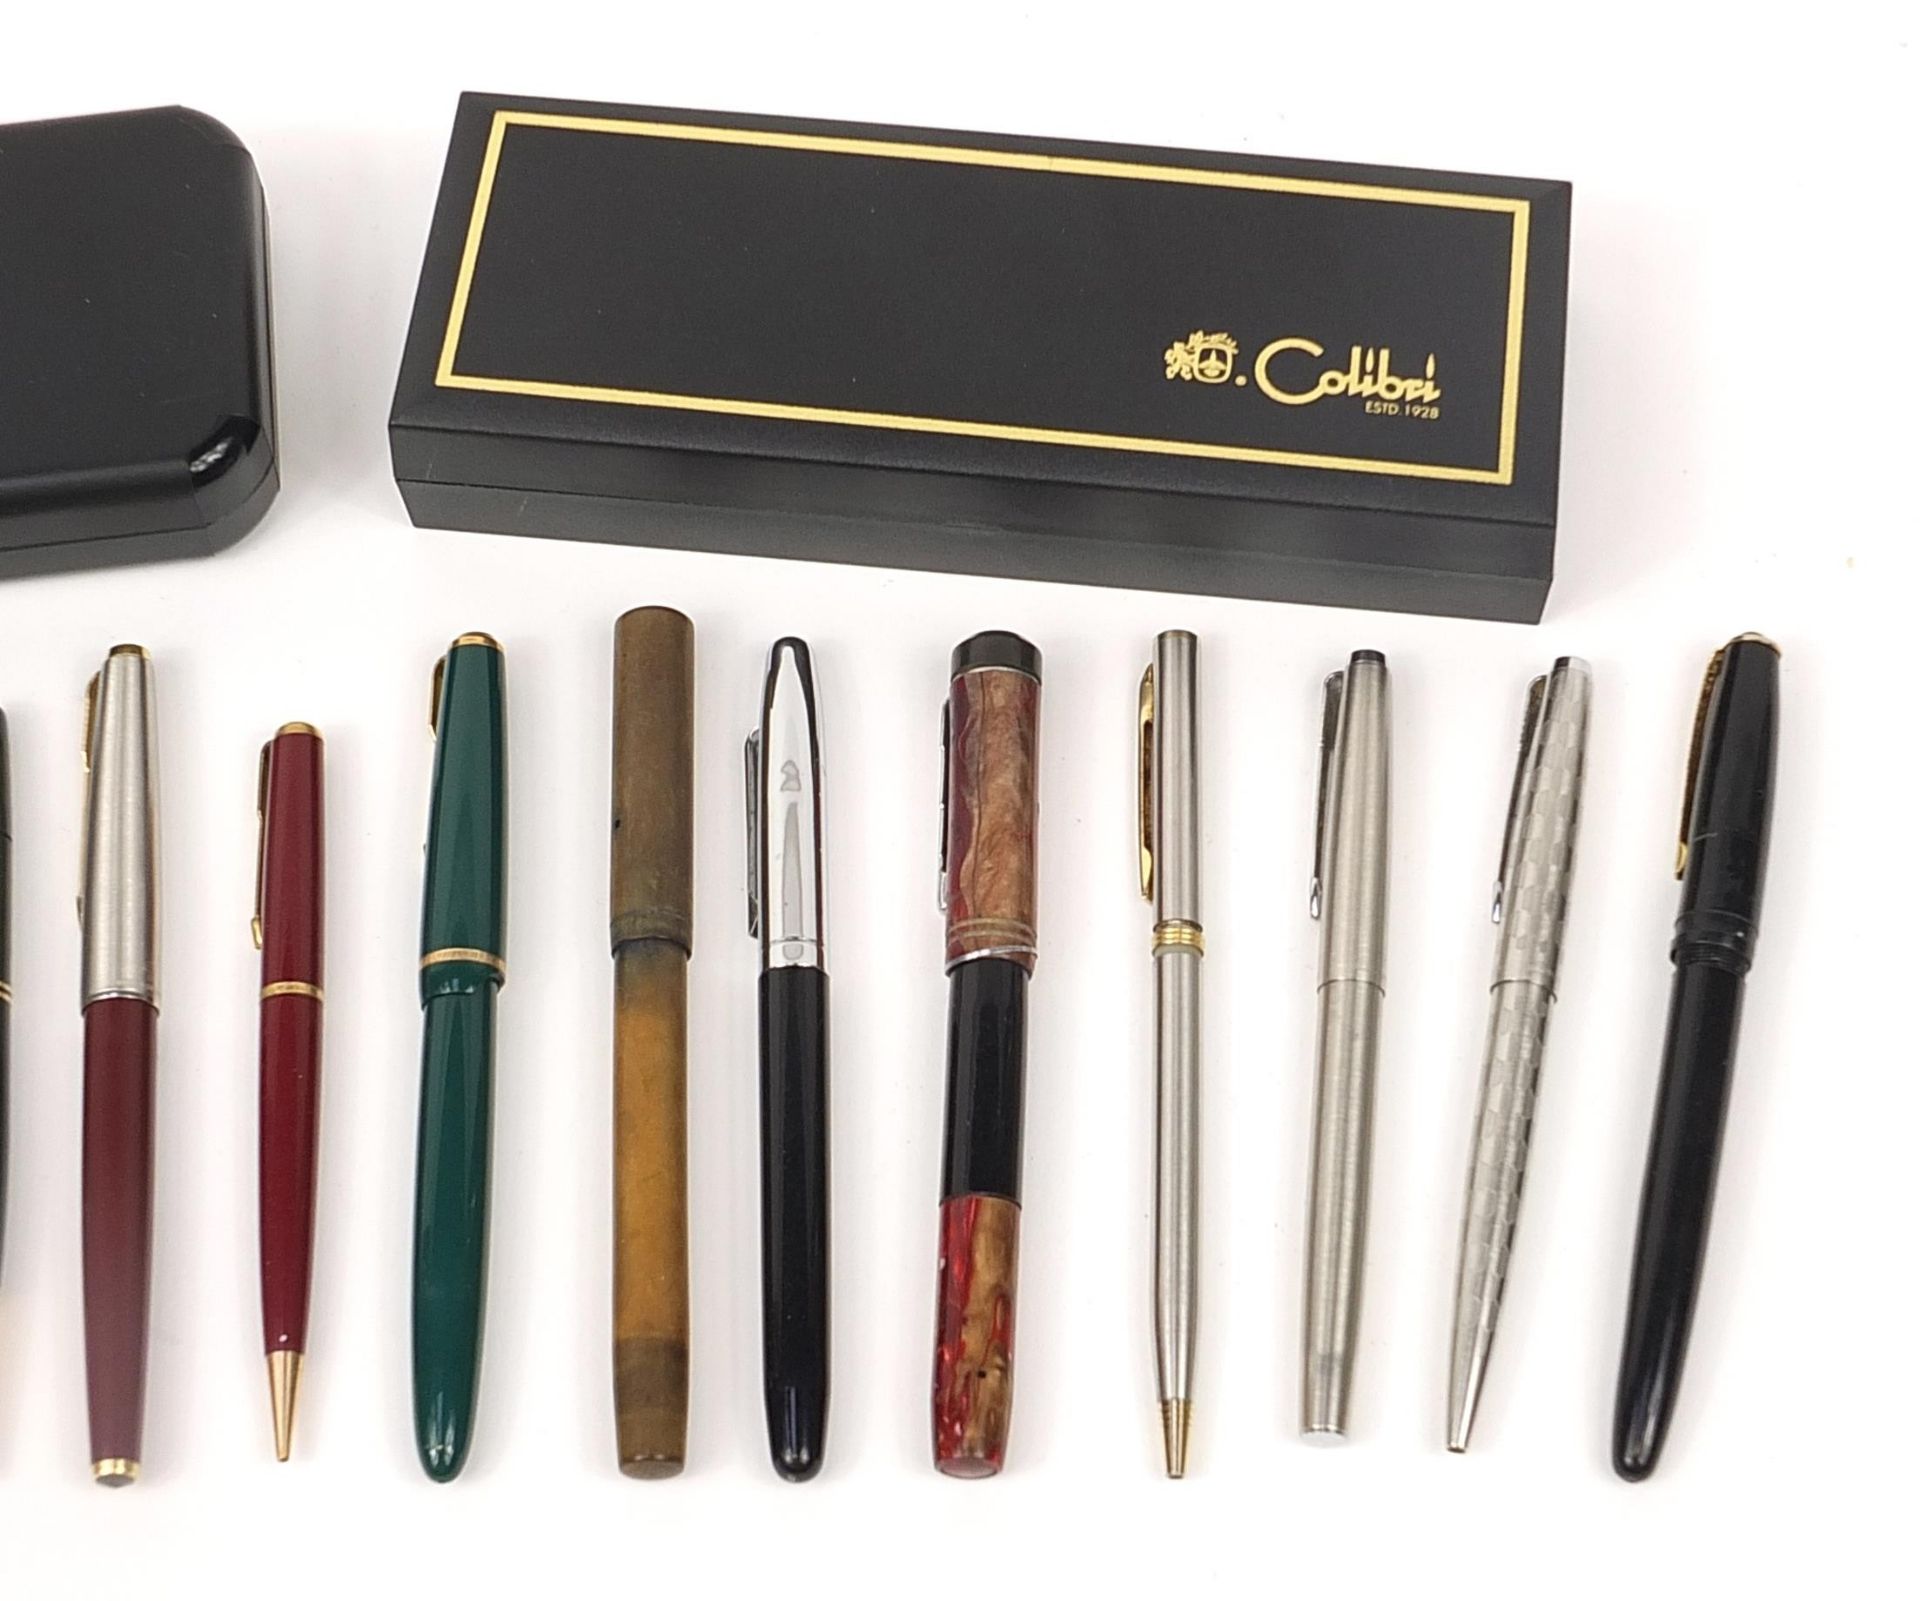 Vintage and later pens, some with gold nibs including Parker, Watermans and Calibre - Image 3 of 3